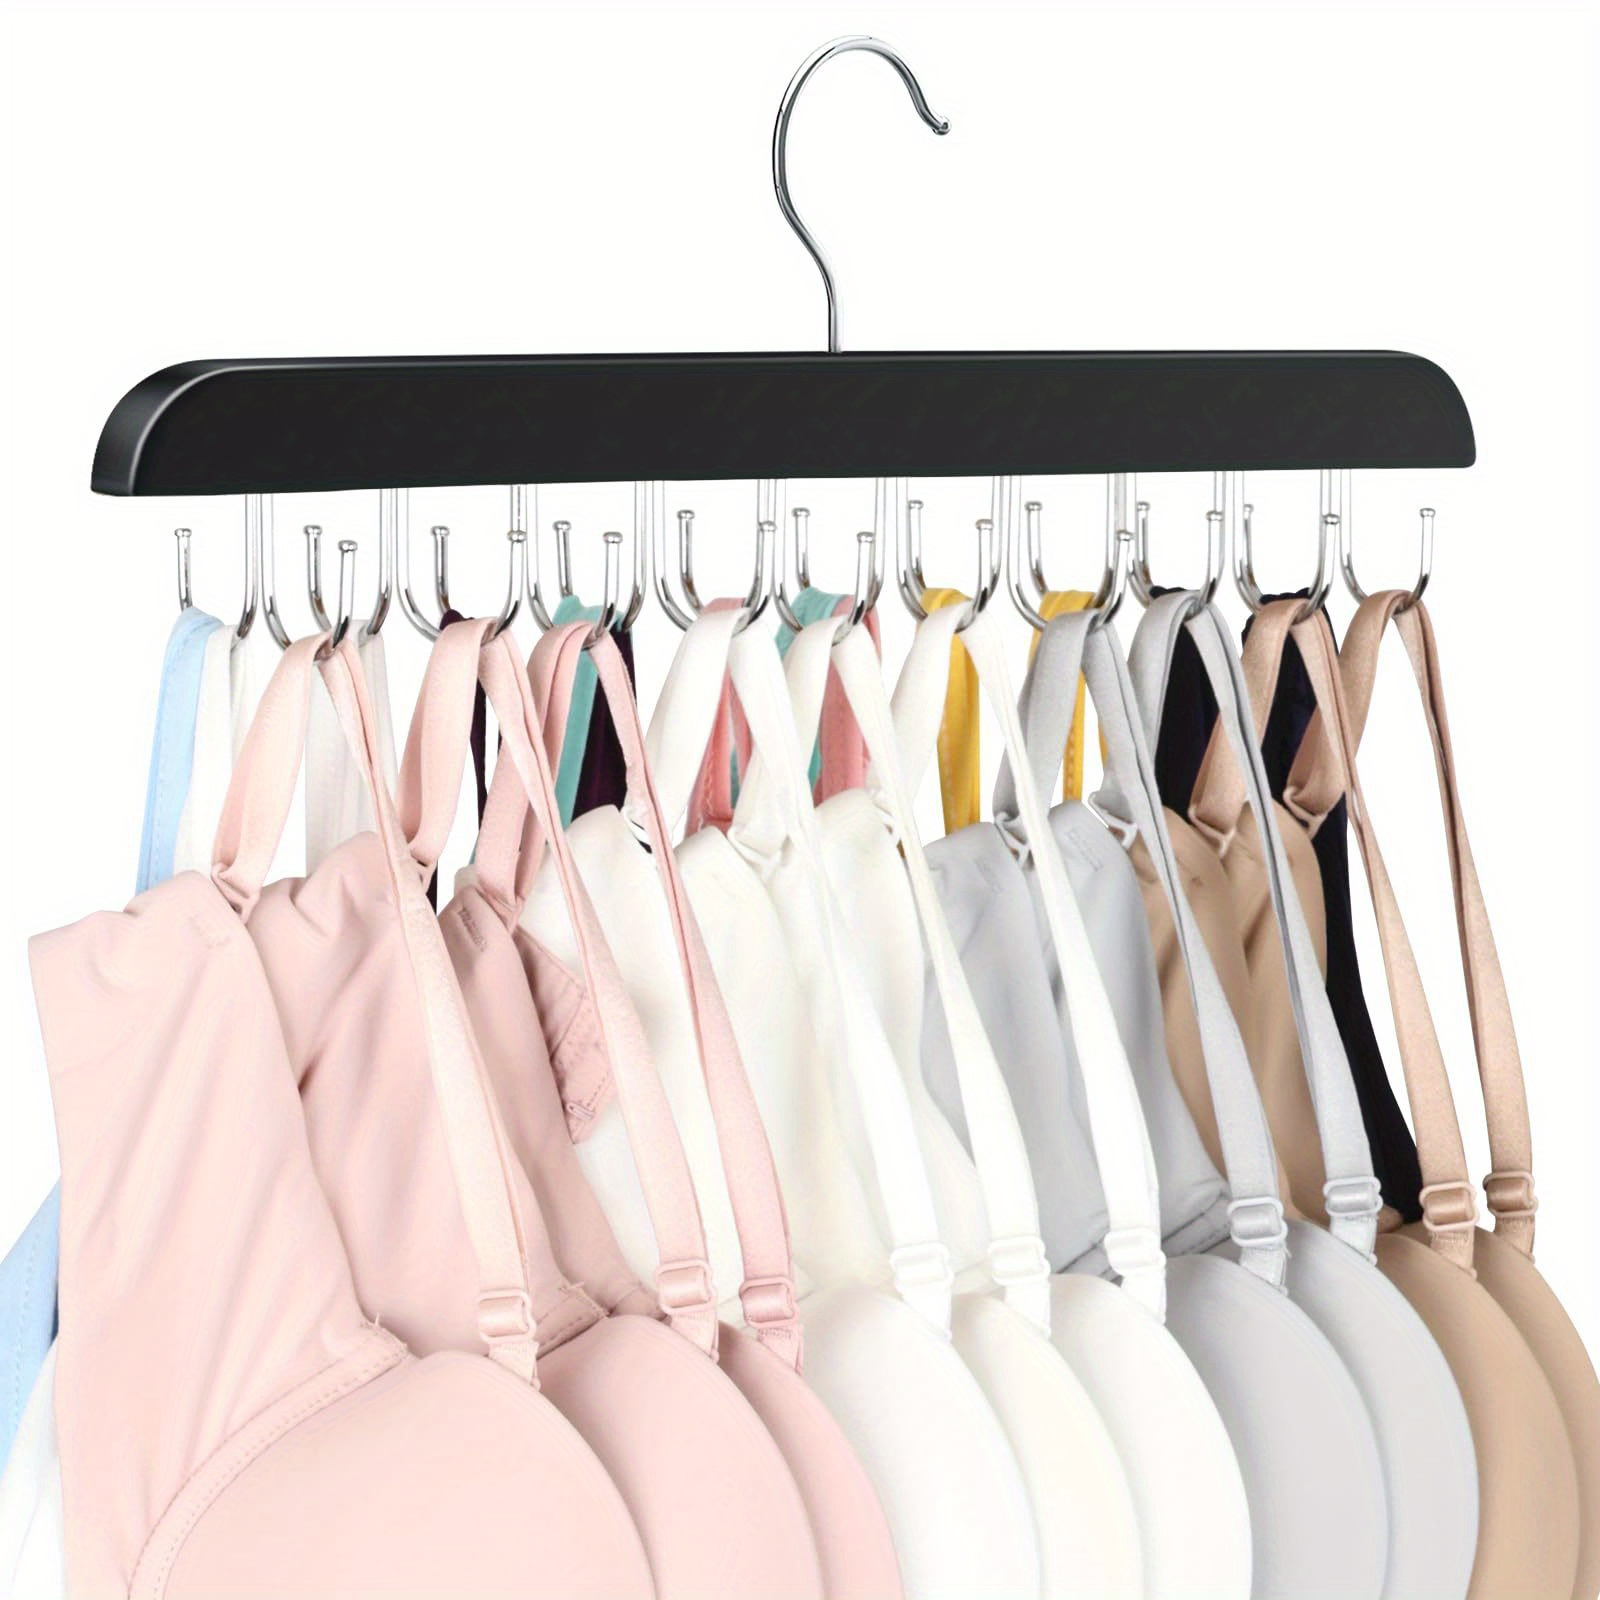  3 Pack Tank Top Hanger, Space Saving Bra Hangers, Non-Slip  Hanging Sport Bras Holder, Closet Organizers And Storage For Camisoles Tank  Tops Bras Ties Swimsuits Strappy Dress, Black